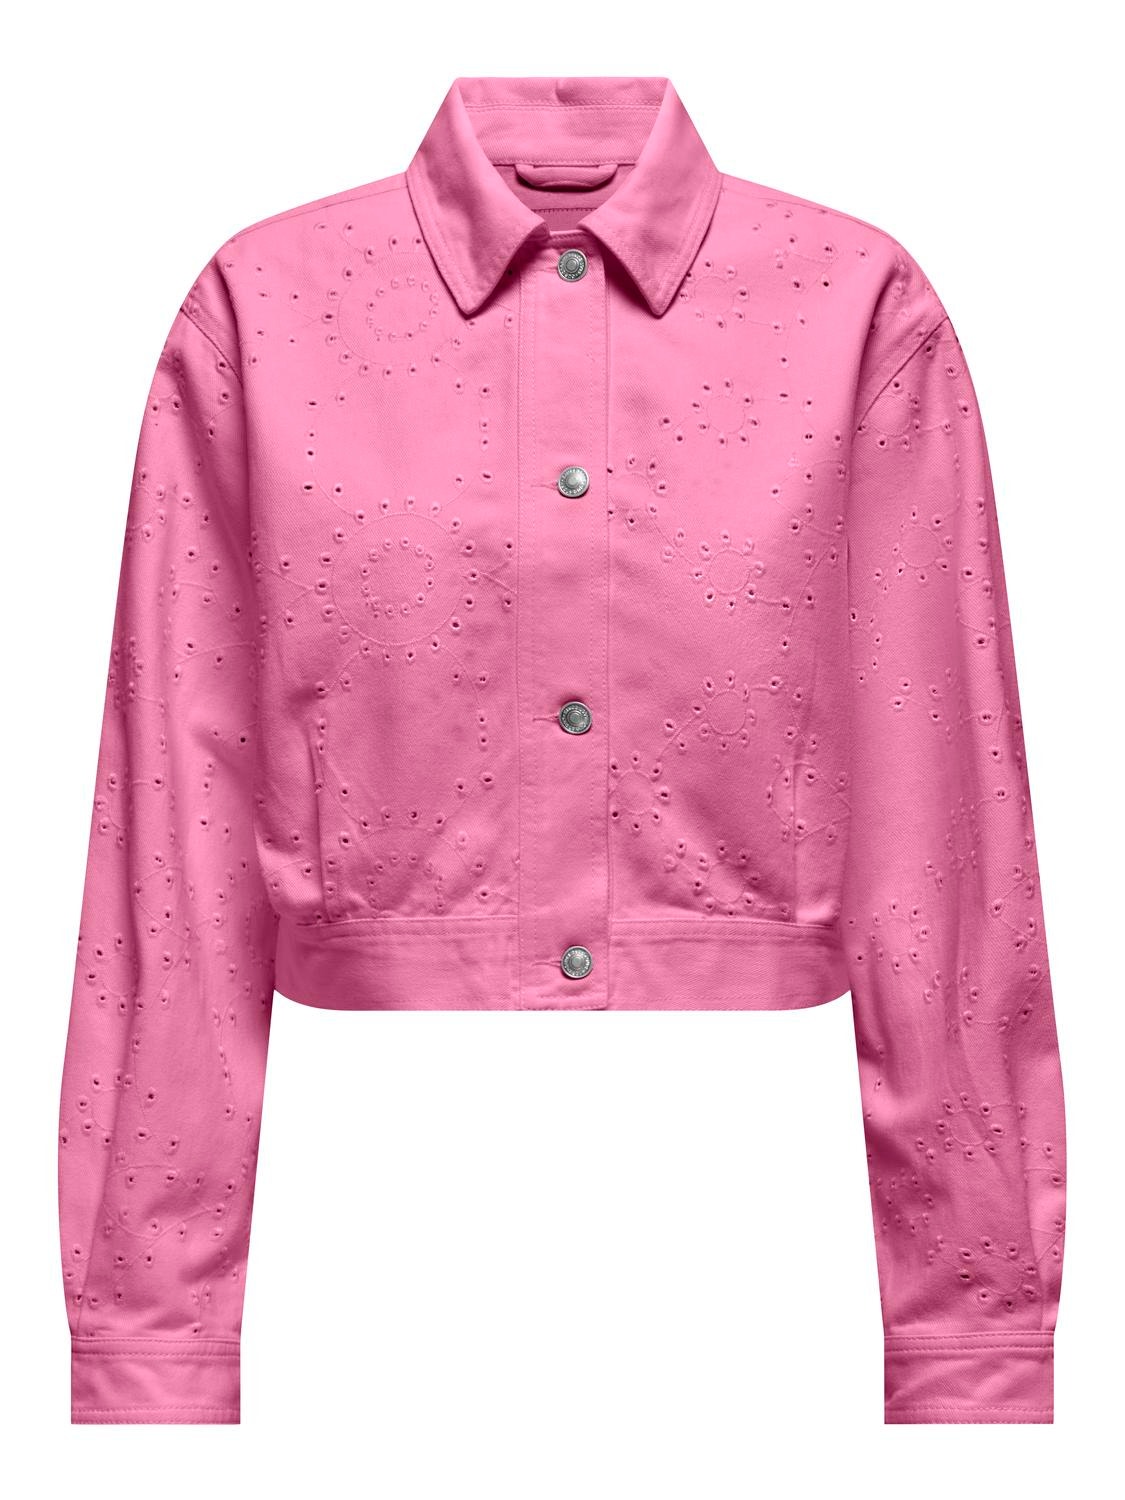 ONLY Cropped embroidered jacket -Begonia Pink - 15312709